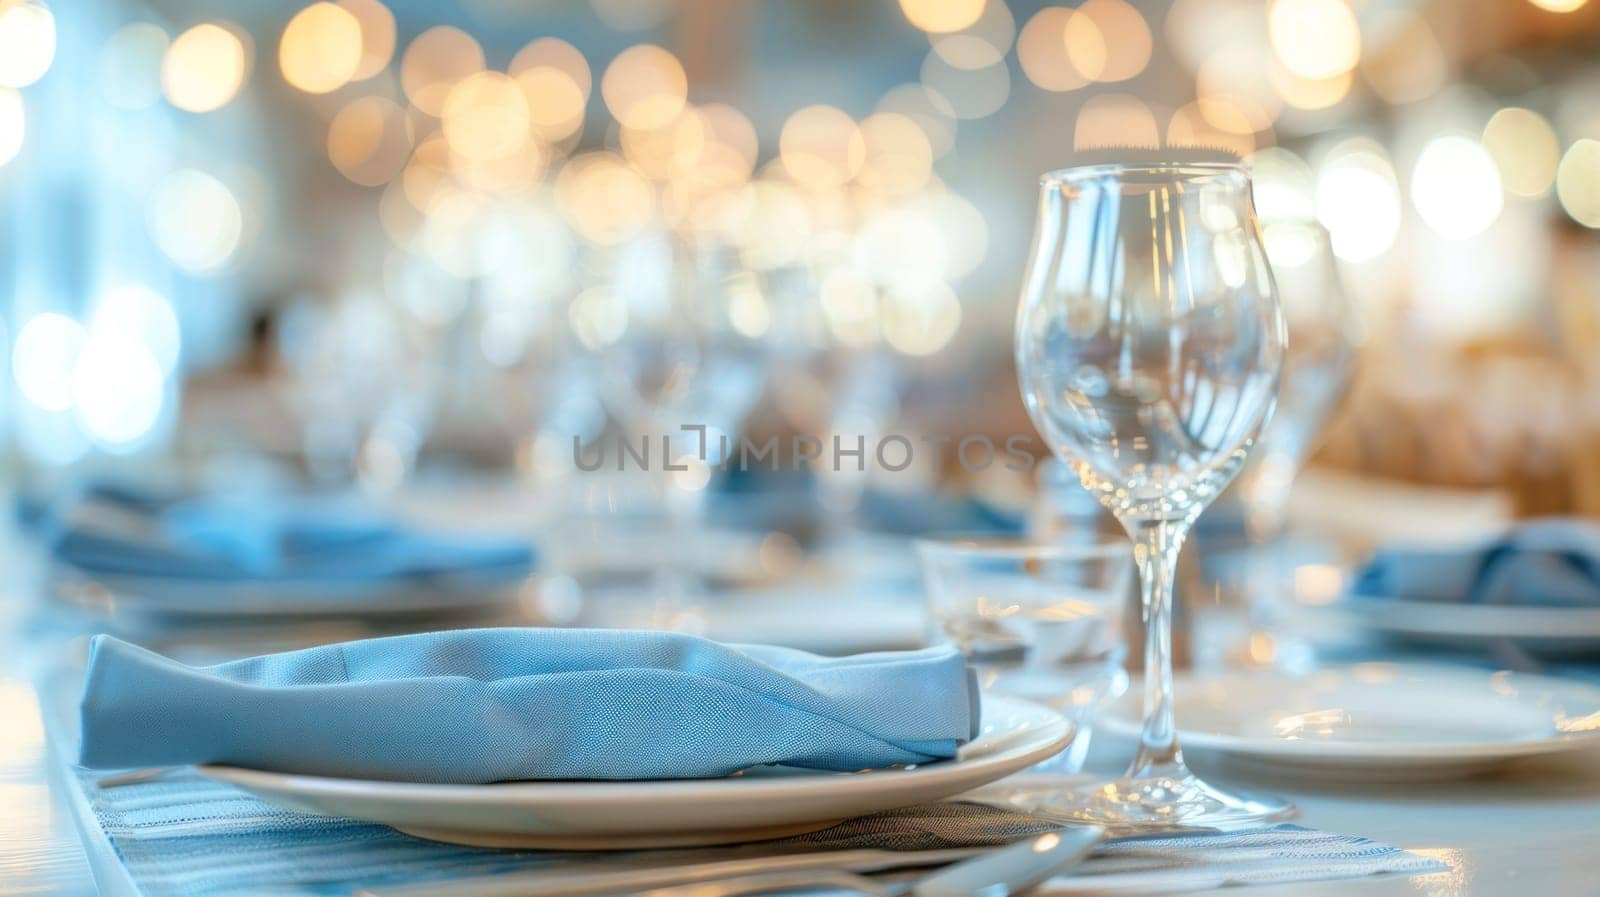 Elegant table setting with blue napkins and wine glasses on white table with bokeh lights in background